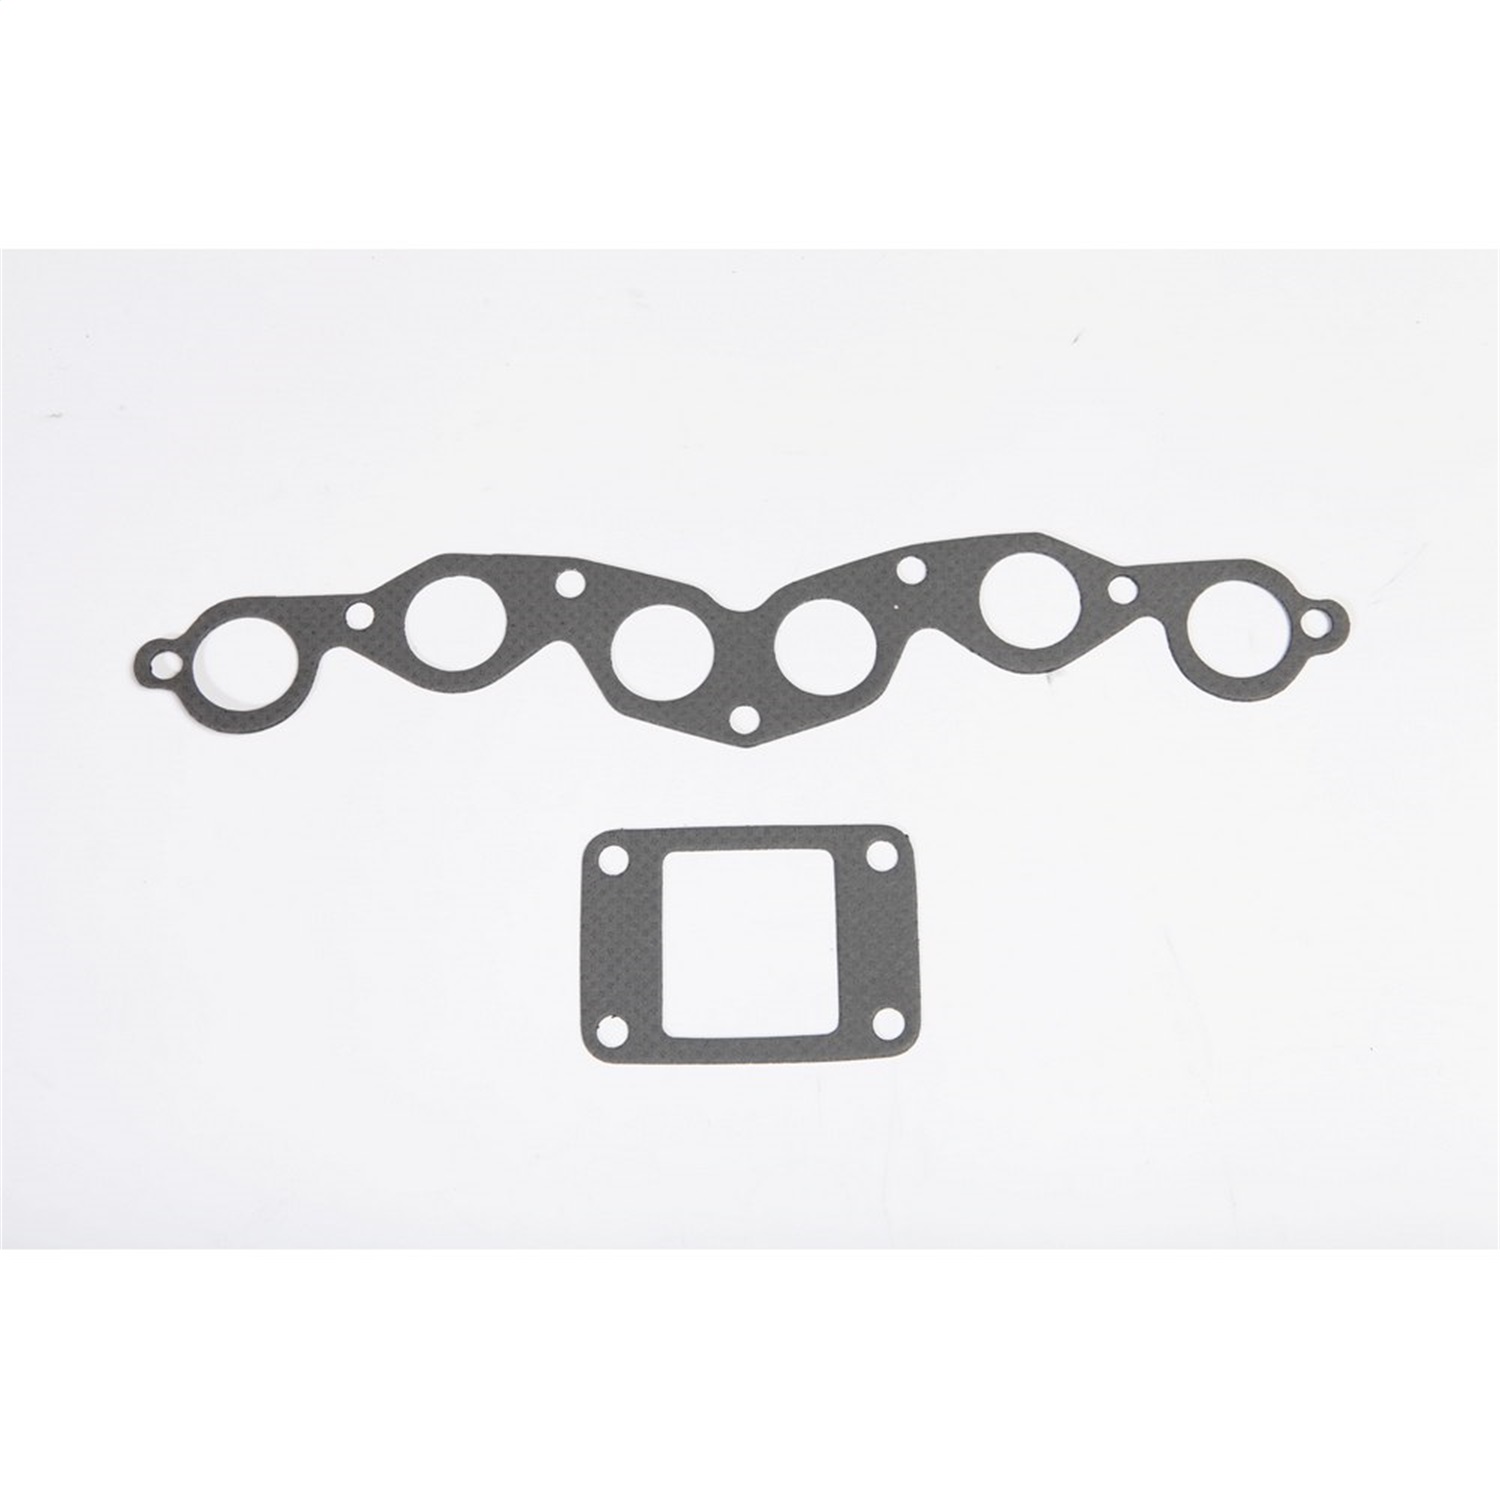 Omix 17451.01 Exhaust Manifold Gasket Set Fits 46-53 Willys